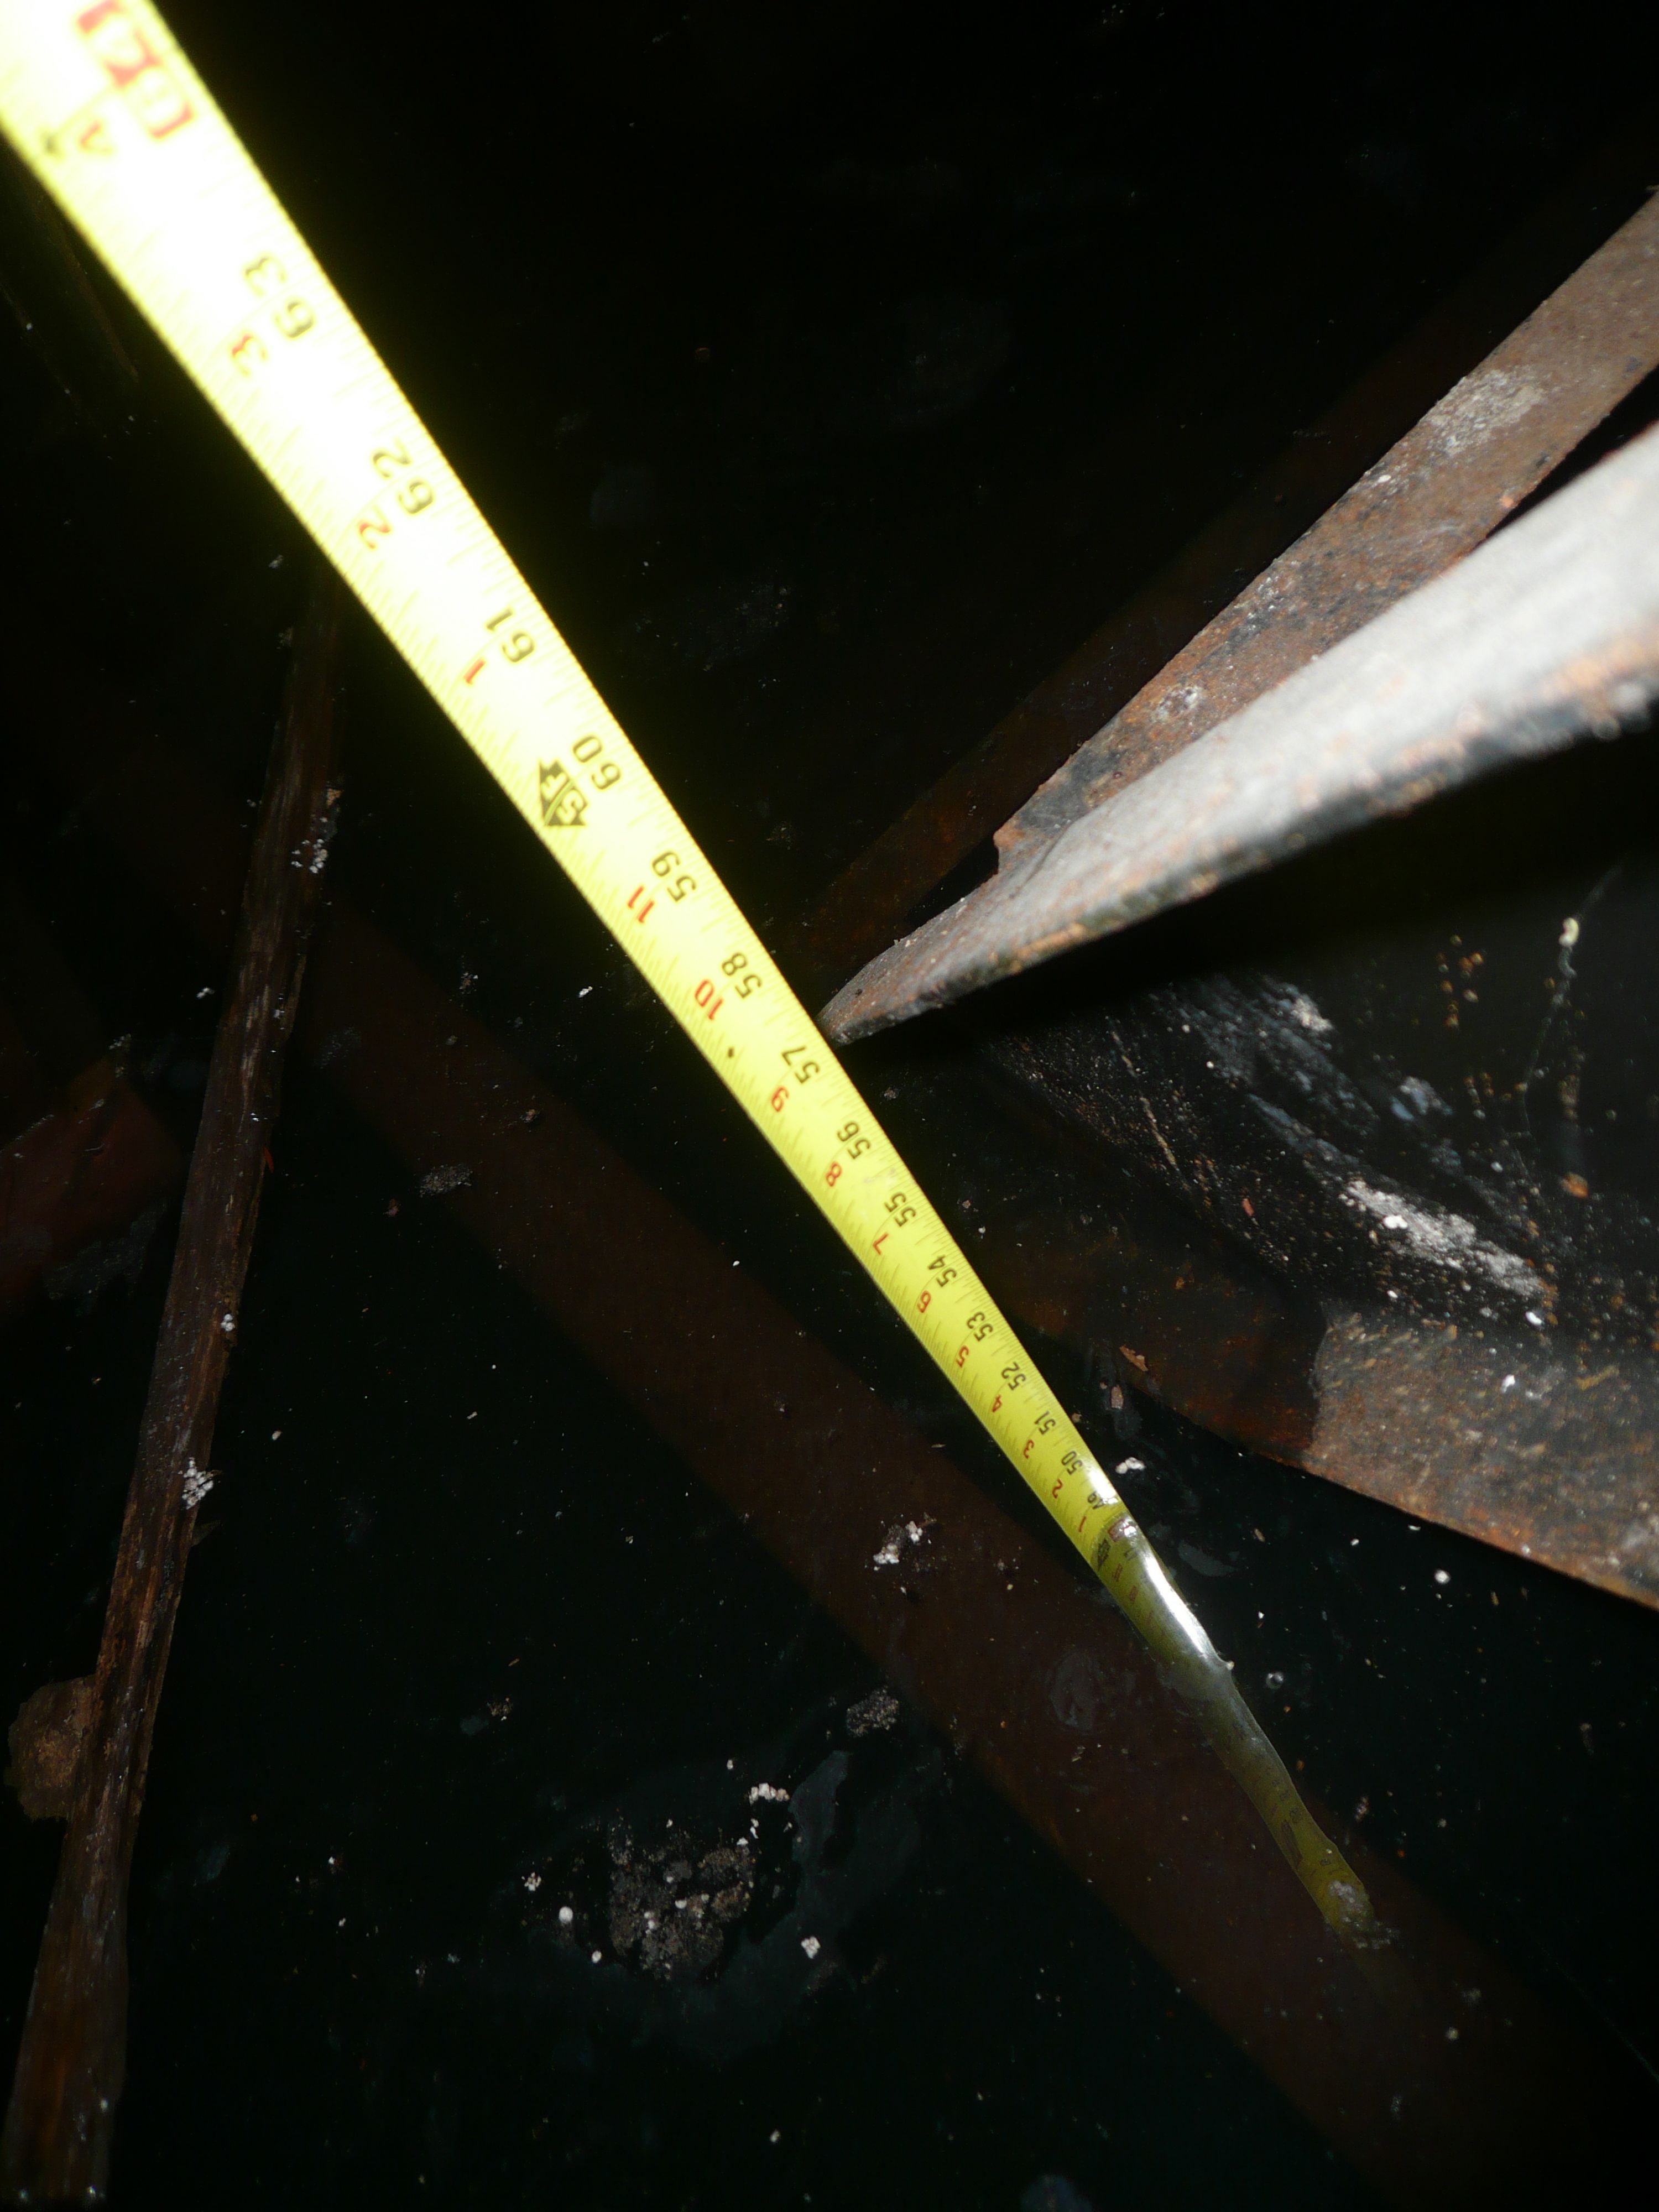 Plunged measuring tape to the basement floor through mirky water